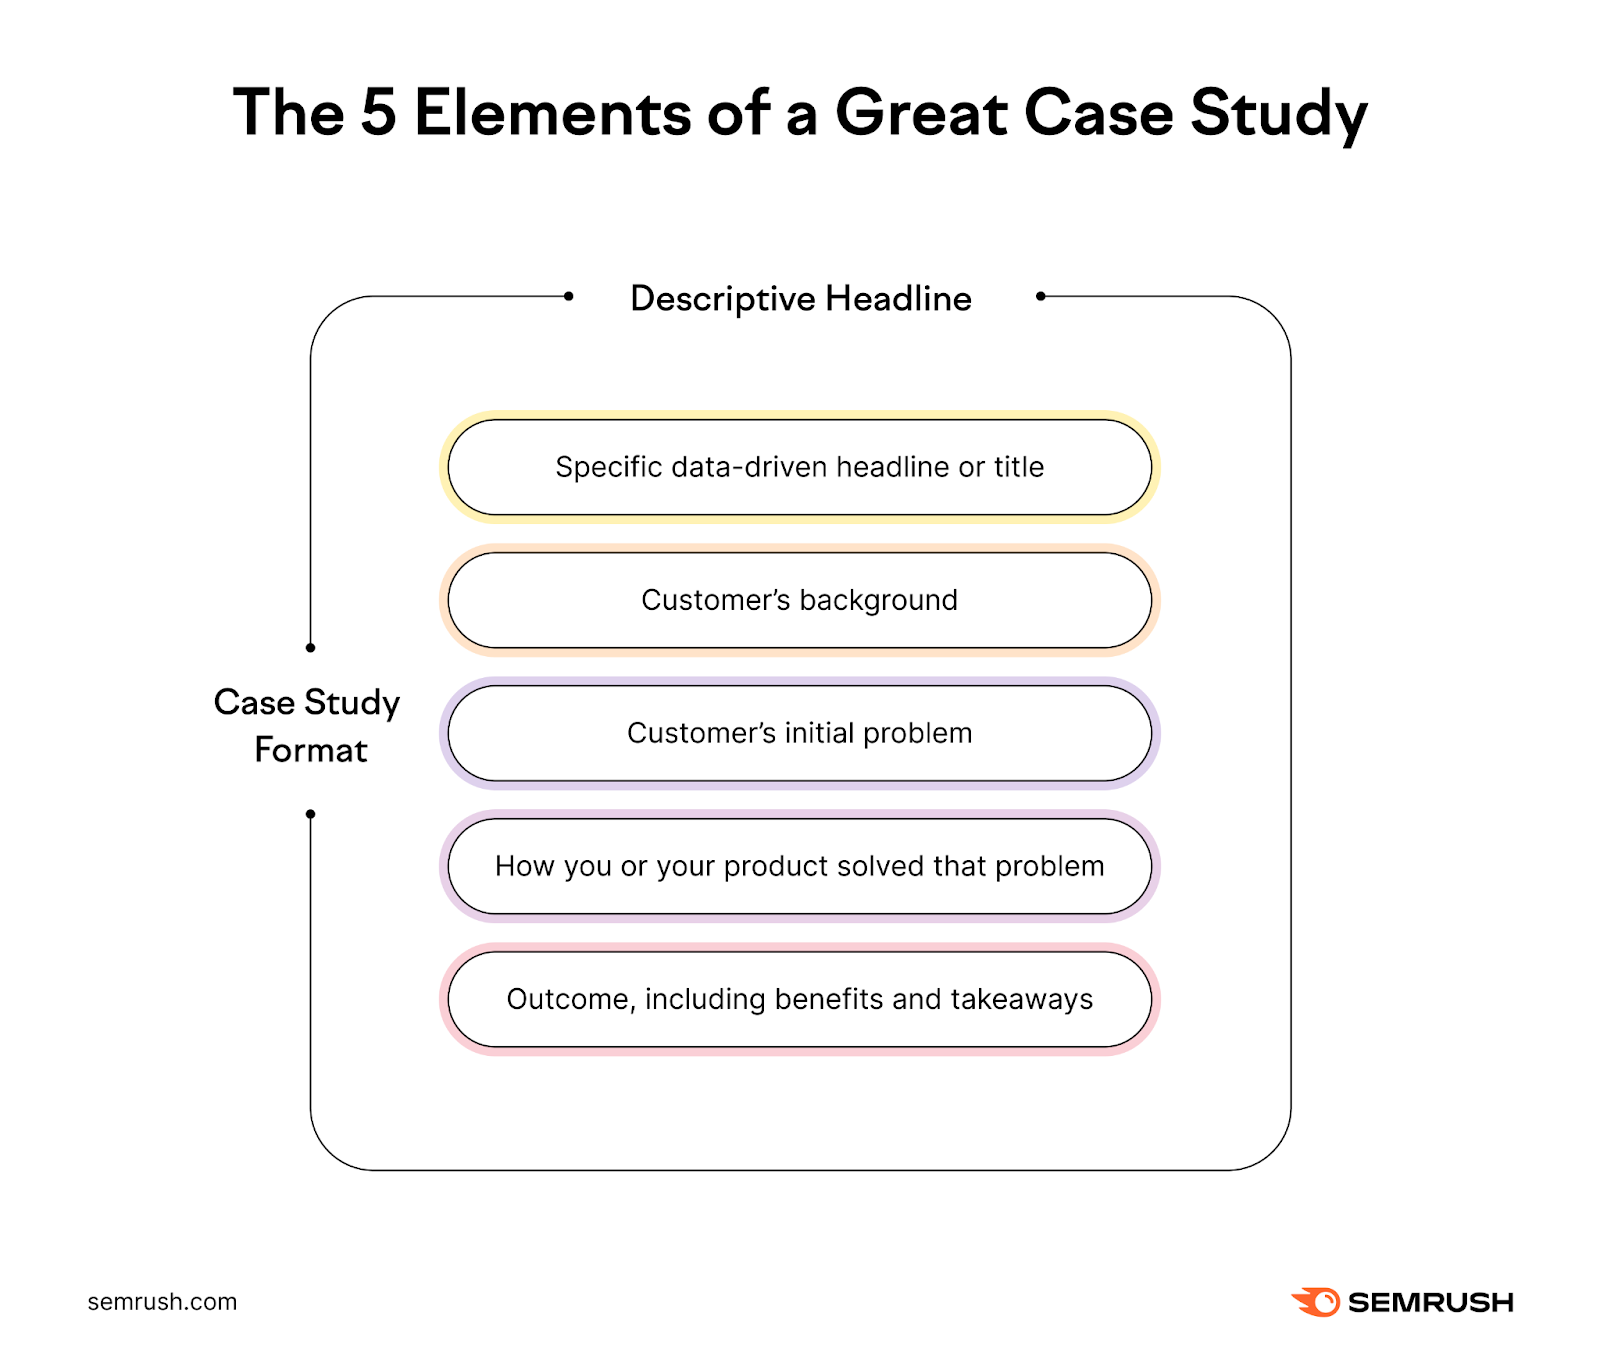 The five essential elements of a great case study